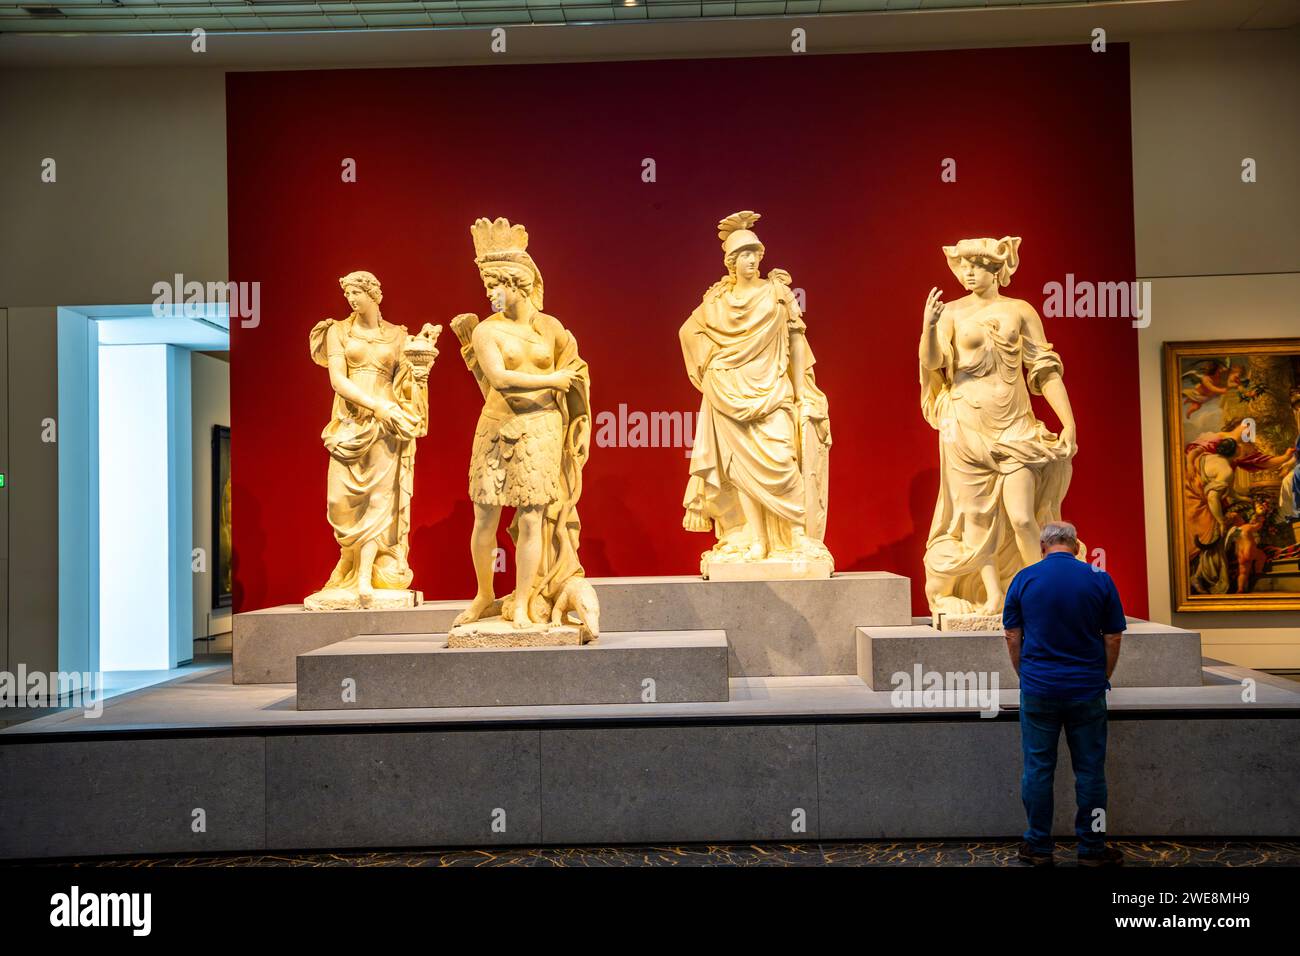 Abu Dhabi, UAE - December 6, 2023: Interior of Louvre and Visitors looking at exhibits, museum in Abu Dhabi, UAE Stock Photo